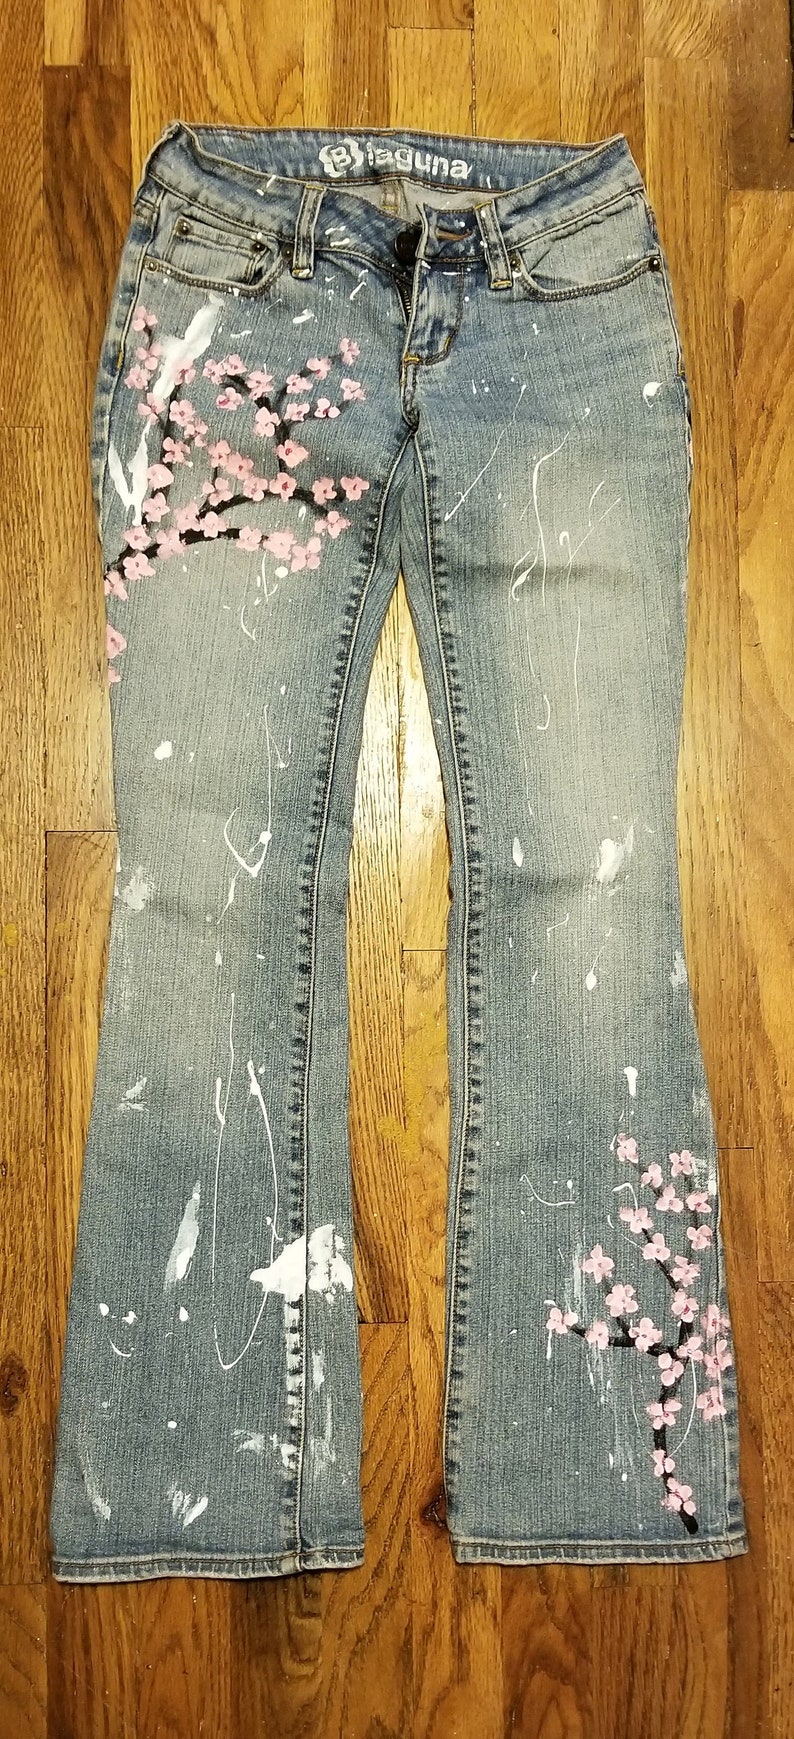 Messy Worn Cherry Blossom Hand Painted Jeans OOAK 4 Pairs - Etsy